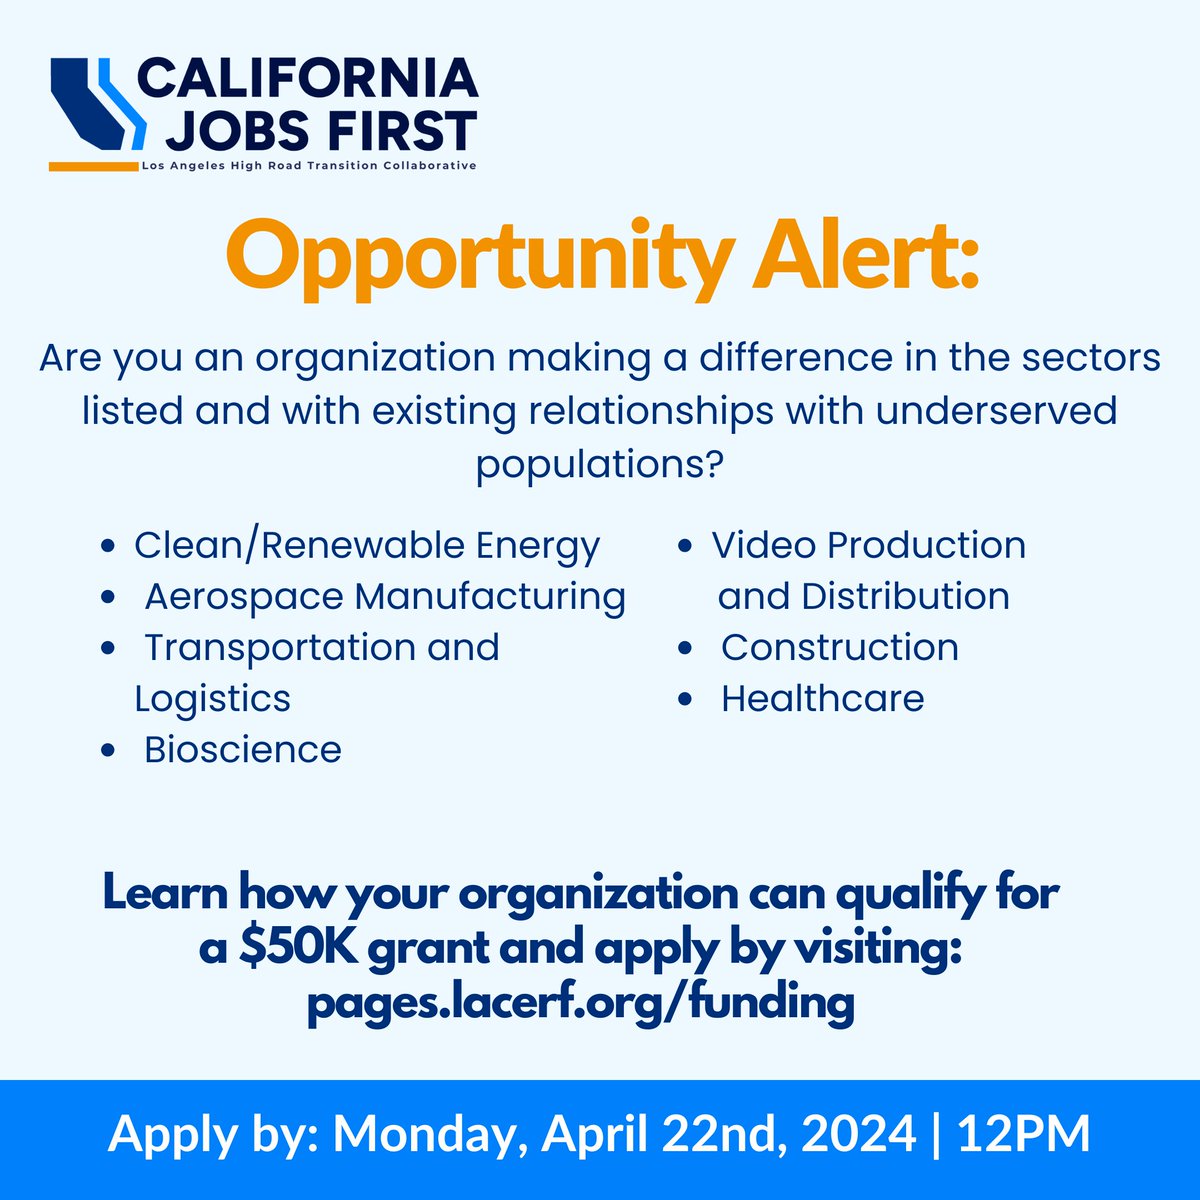 📢 Attention LA community leaders! Here's your chance to secure $50,000 in funding for your organization. Let's work together to drive sustainable growth and prosperity for all 💪🏽 Apply by April 22, 2024: pages.lacerf.org/funding